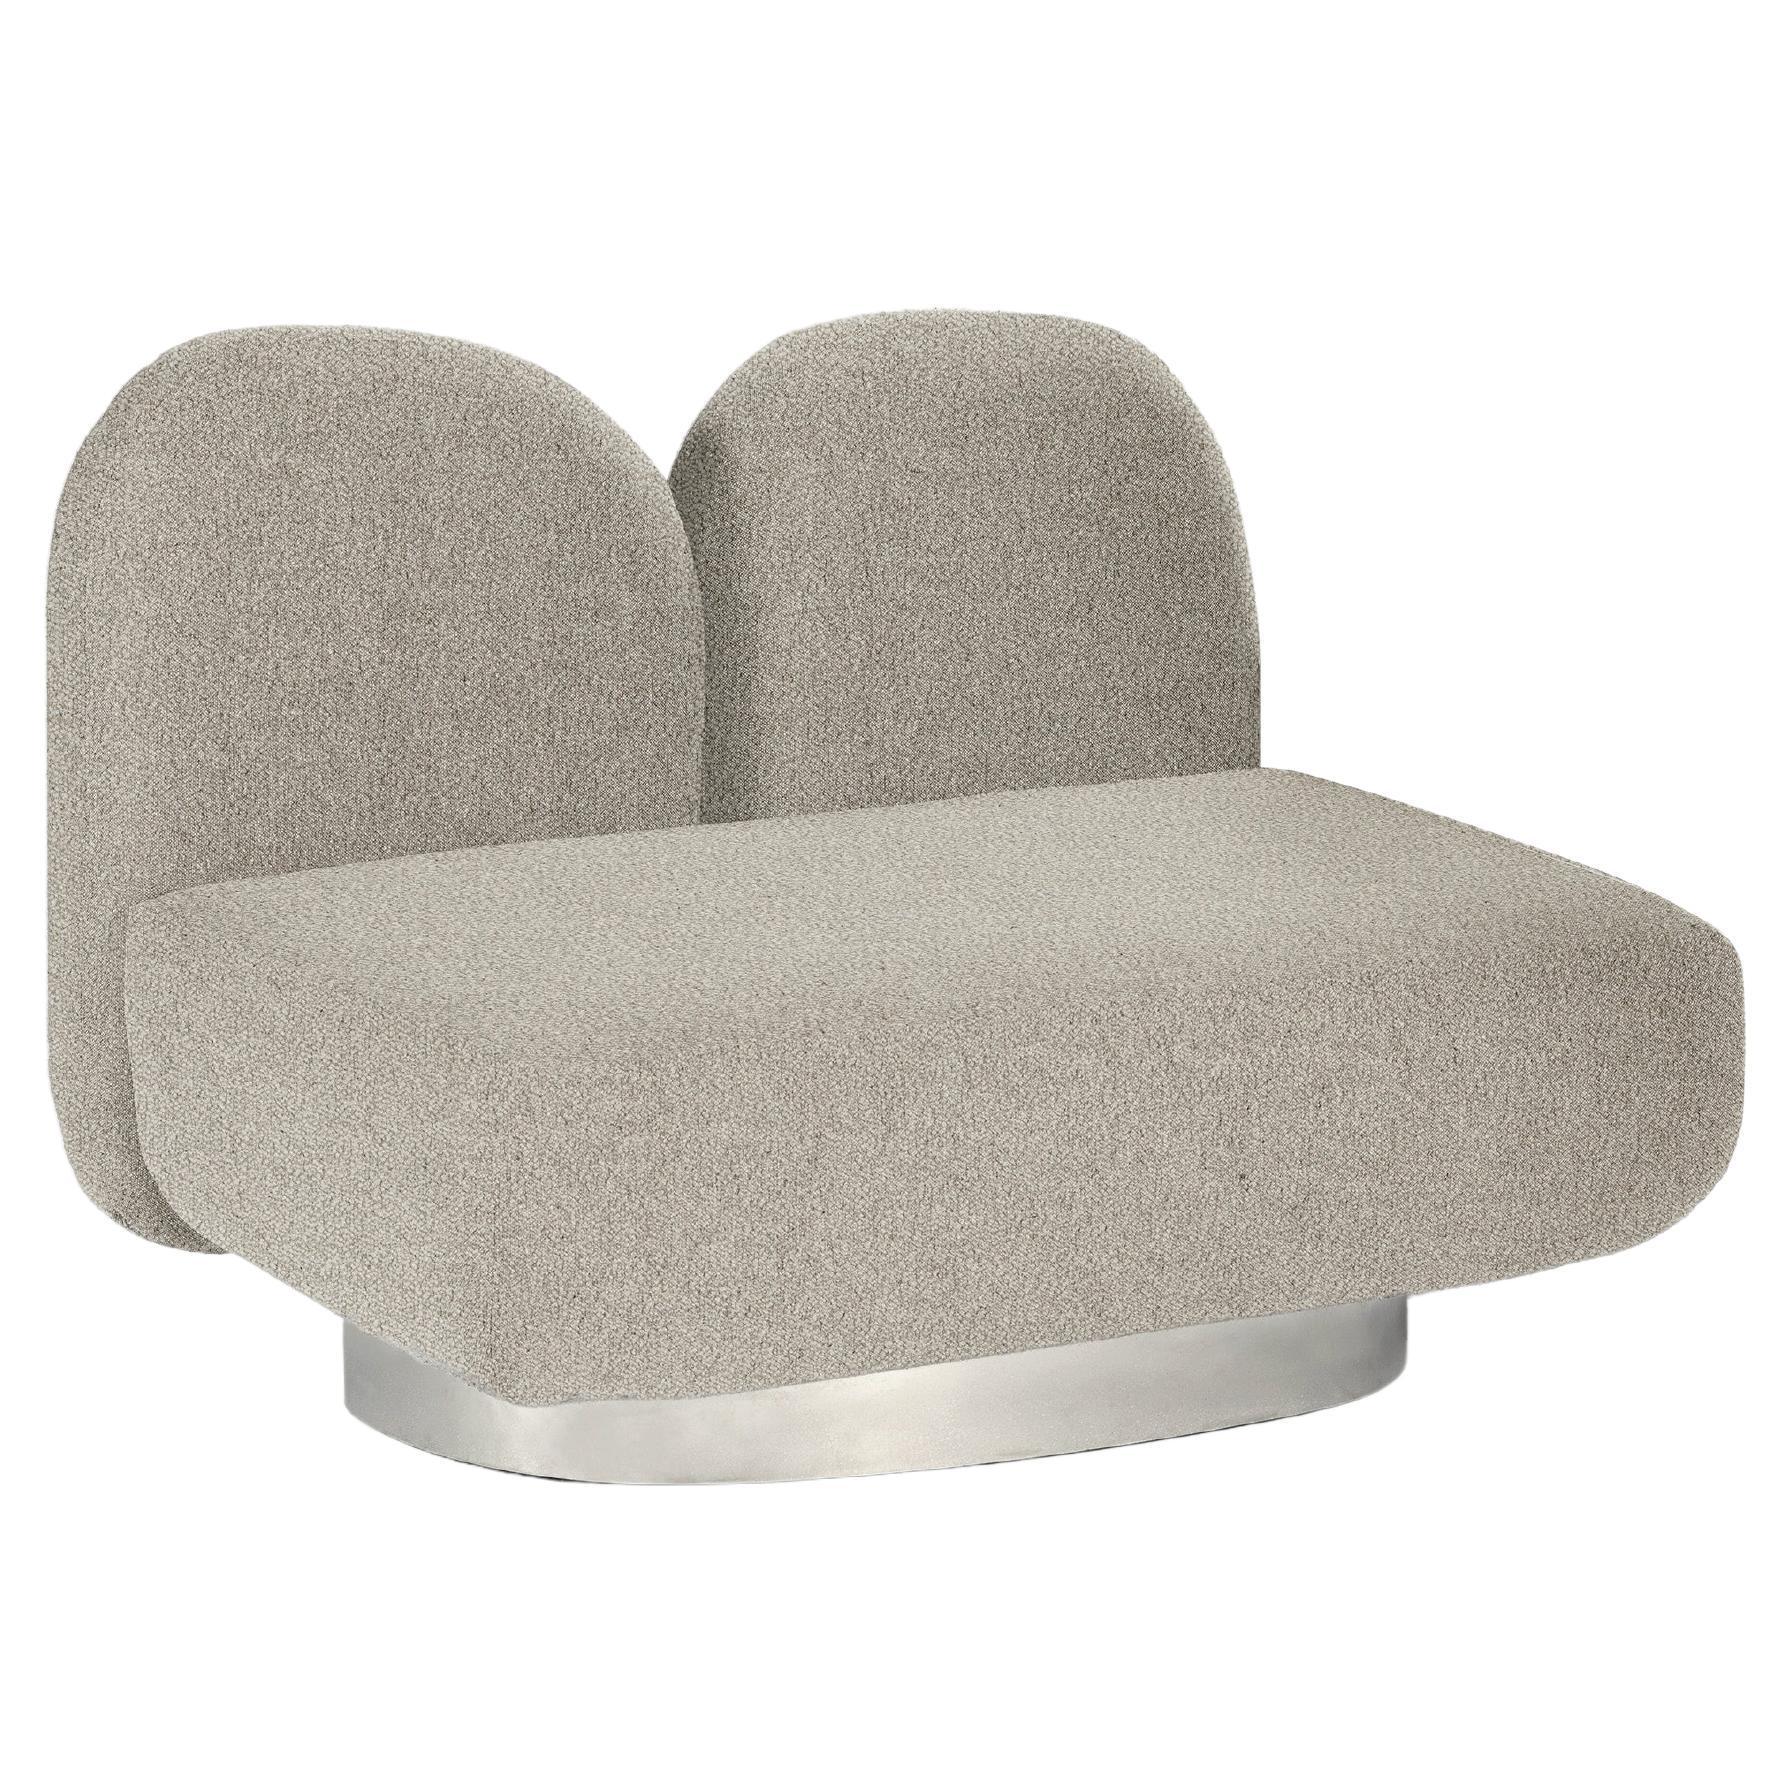 Contemporary Sofa 'Assemble' by Destroyers/Builders, 1 seater For Sale